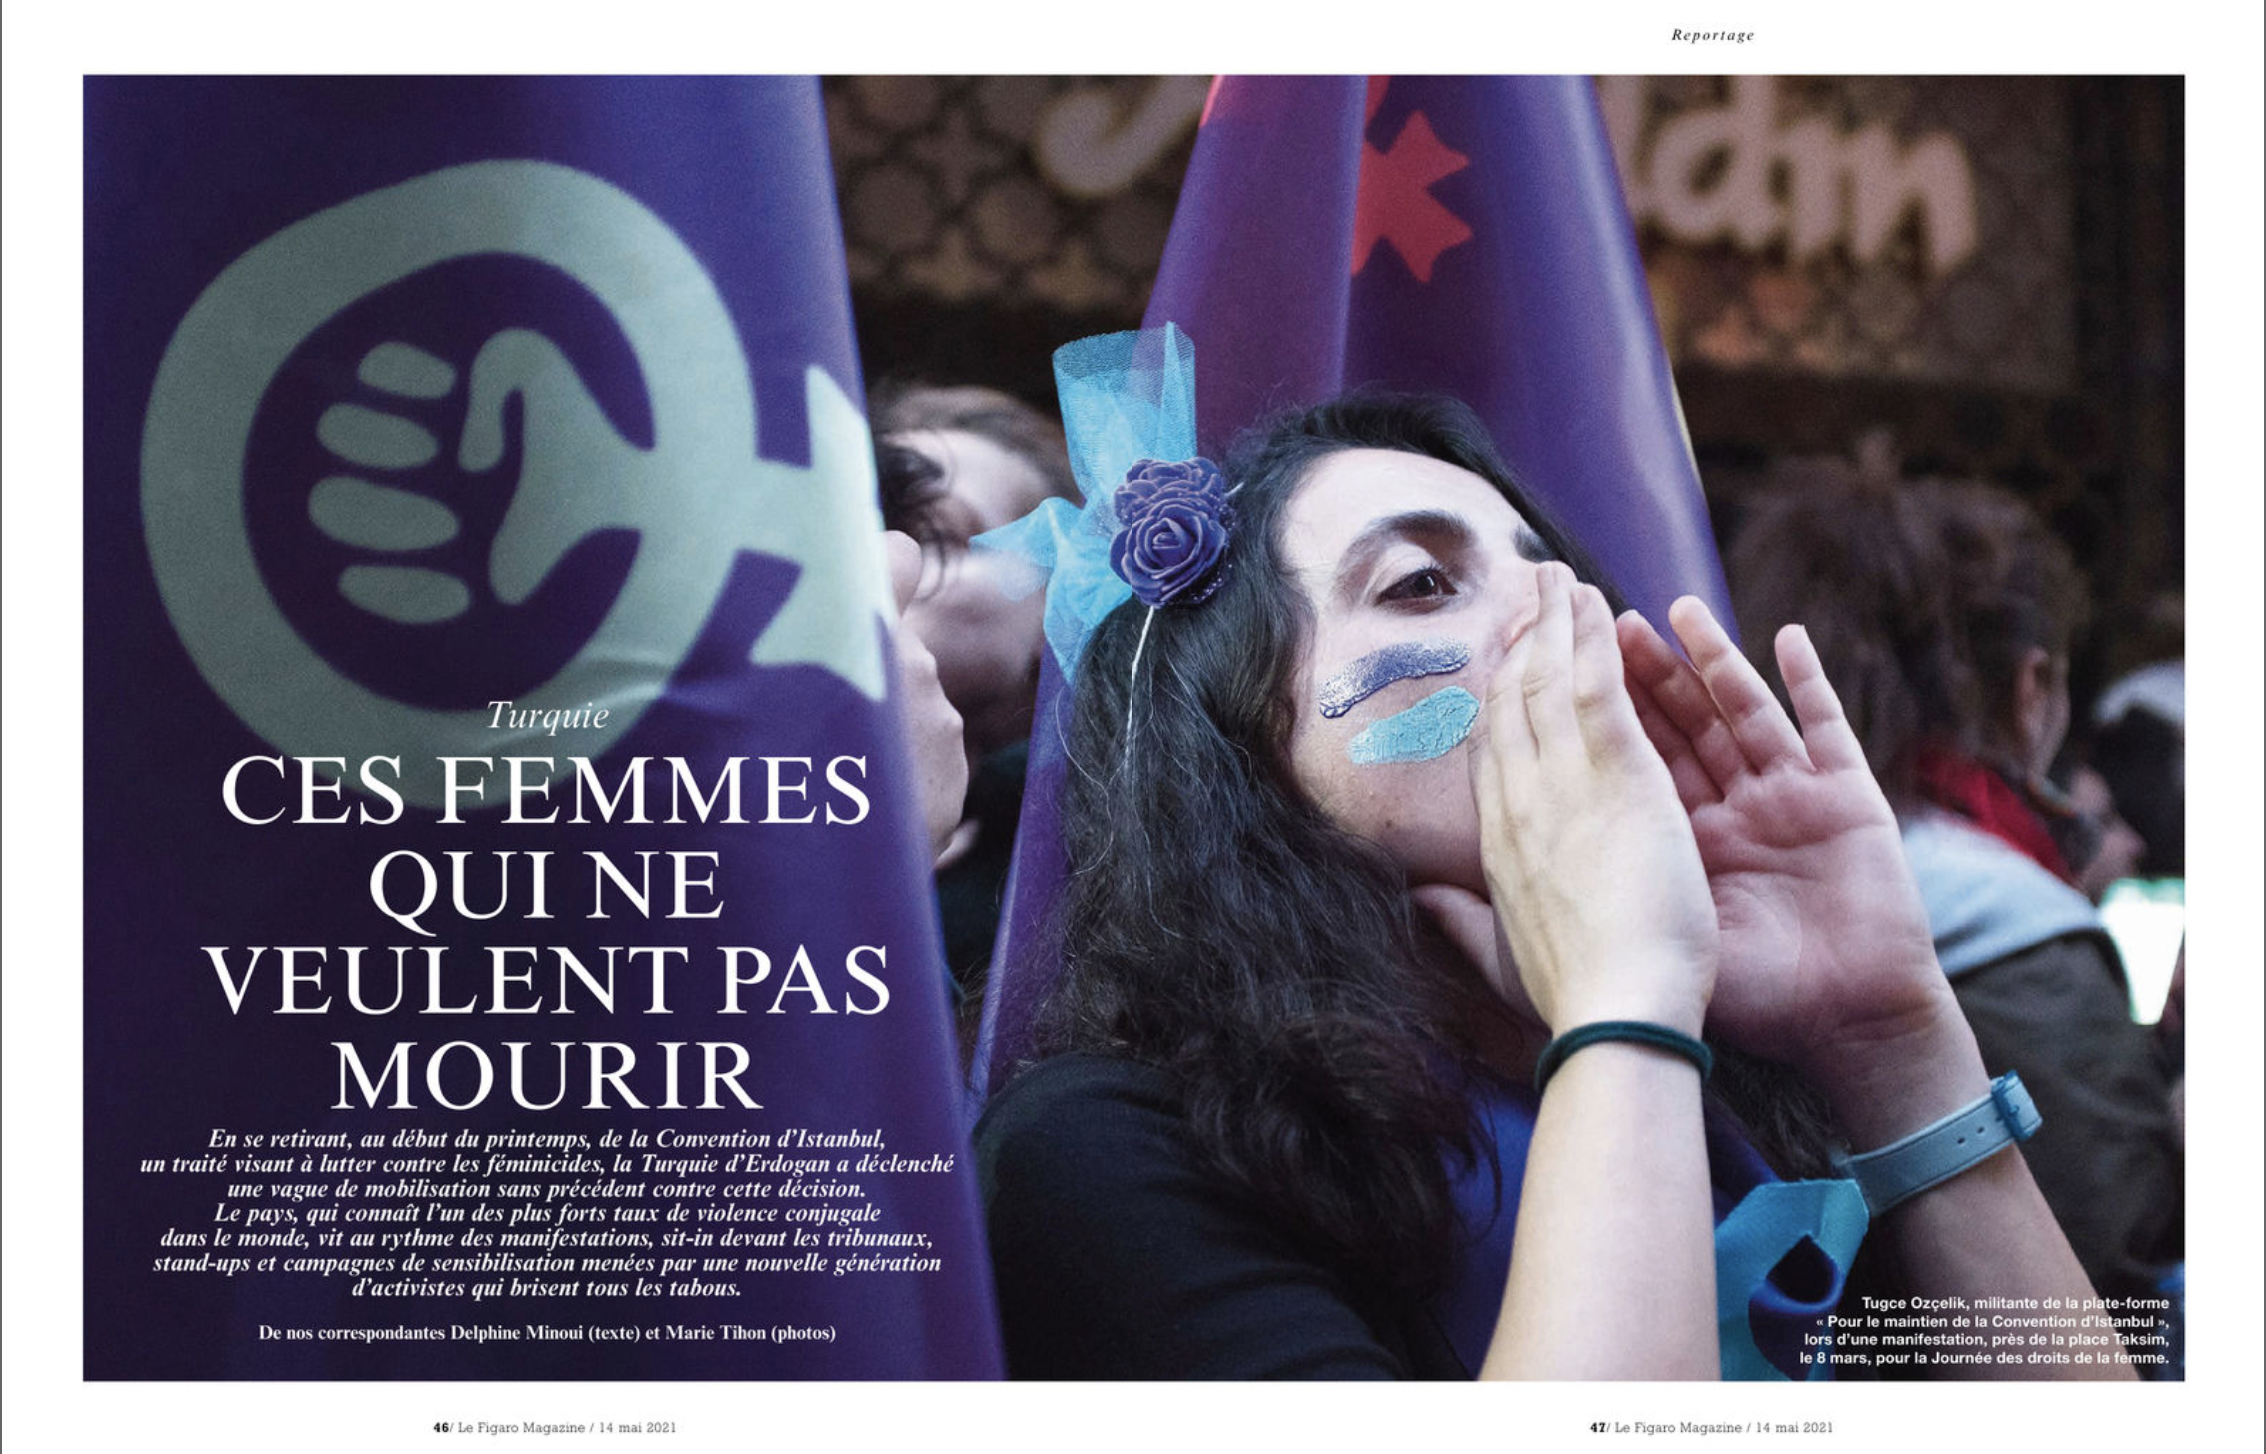 Publications - Le Figaro Magazine - 8 pages